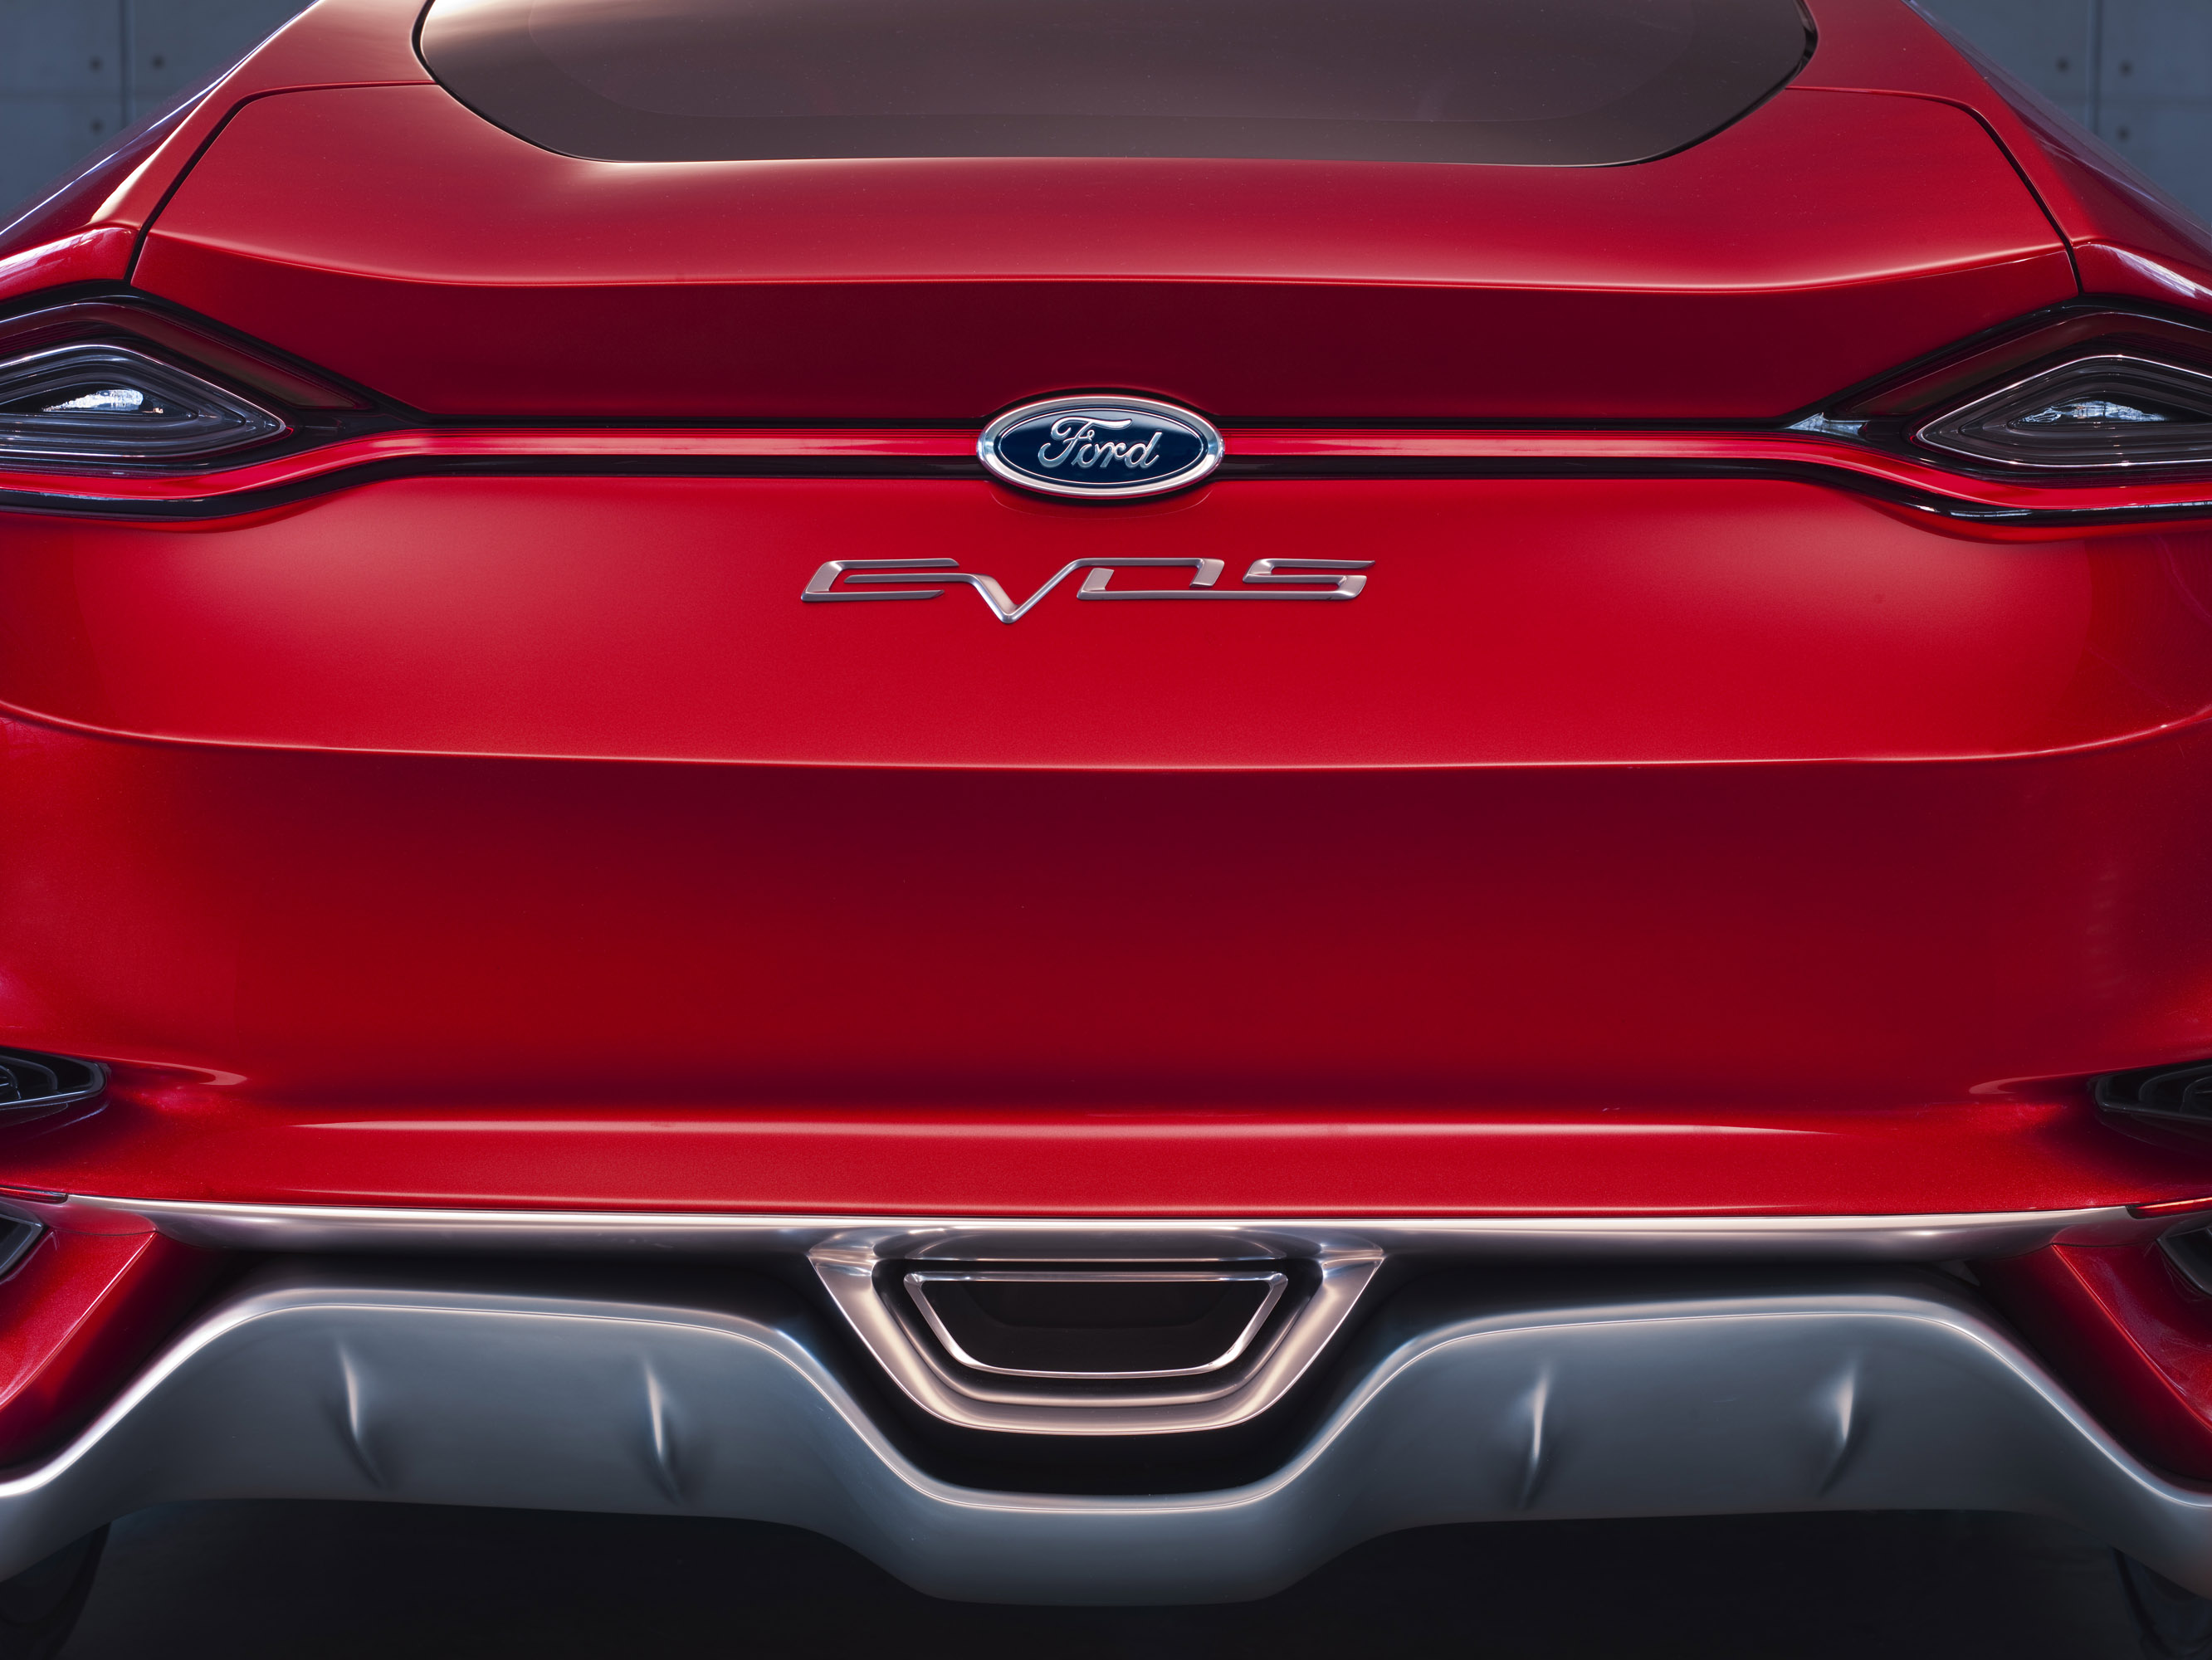 Ford Evos Wallpapers